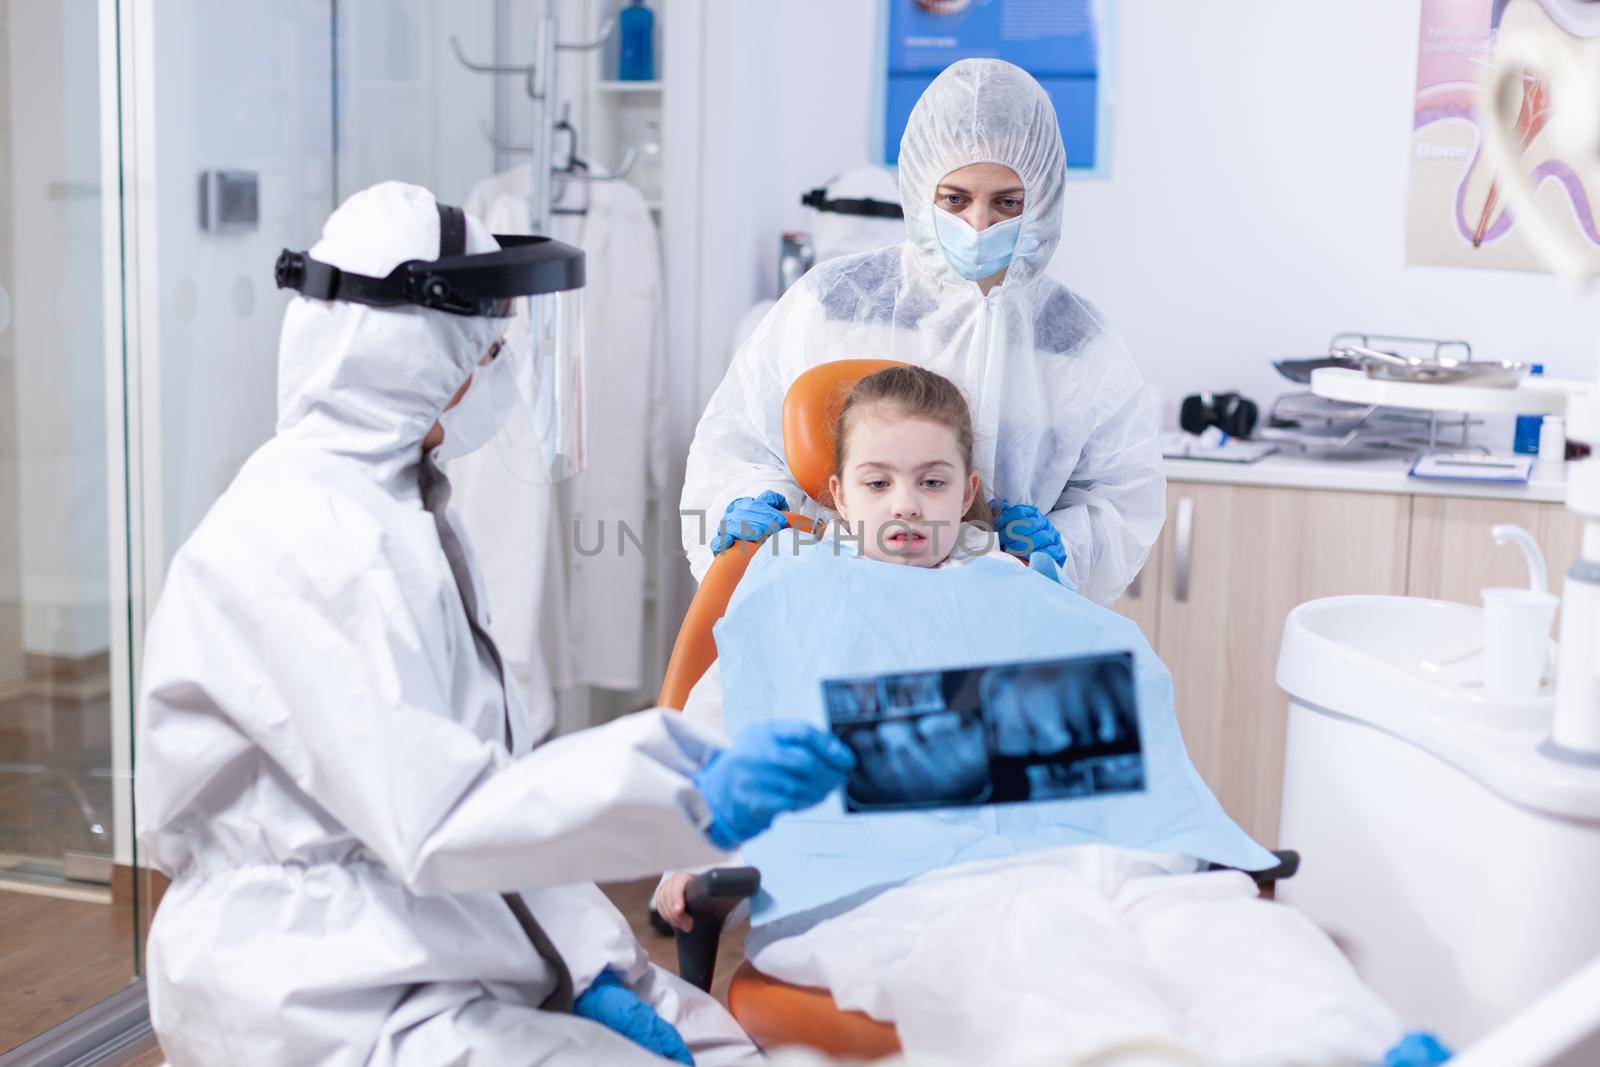 Little girl and mother wearing ppe suit looking at dental radiography in dentist office during covid19 pandemic. Stomatolog in protectie suit for coroanvirus as safety precaution holding child teeth x-ray during consultation.